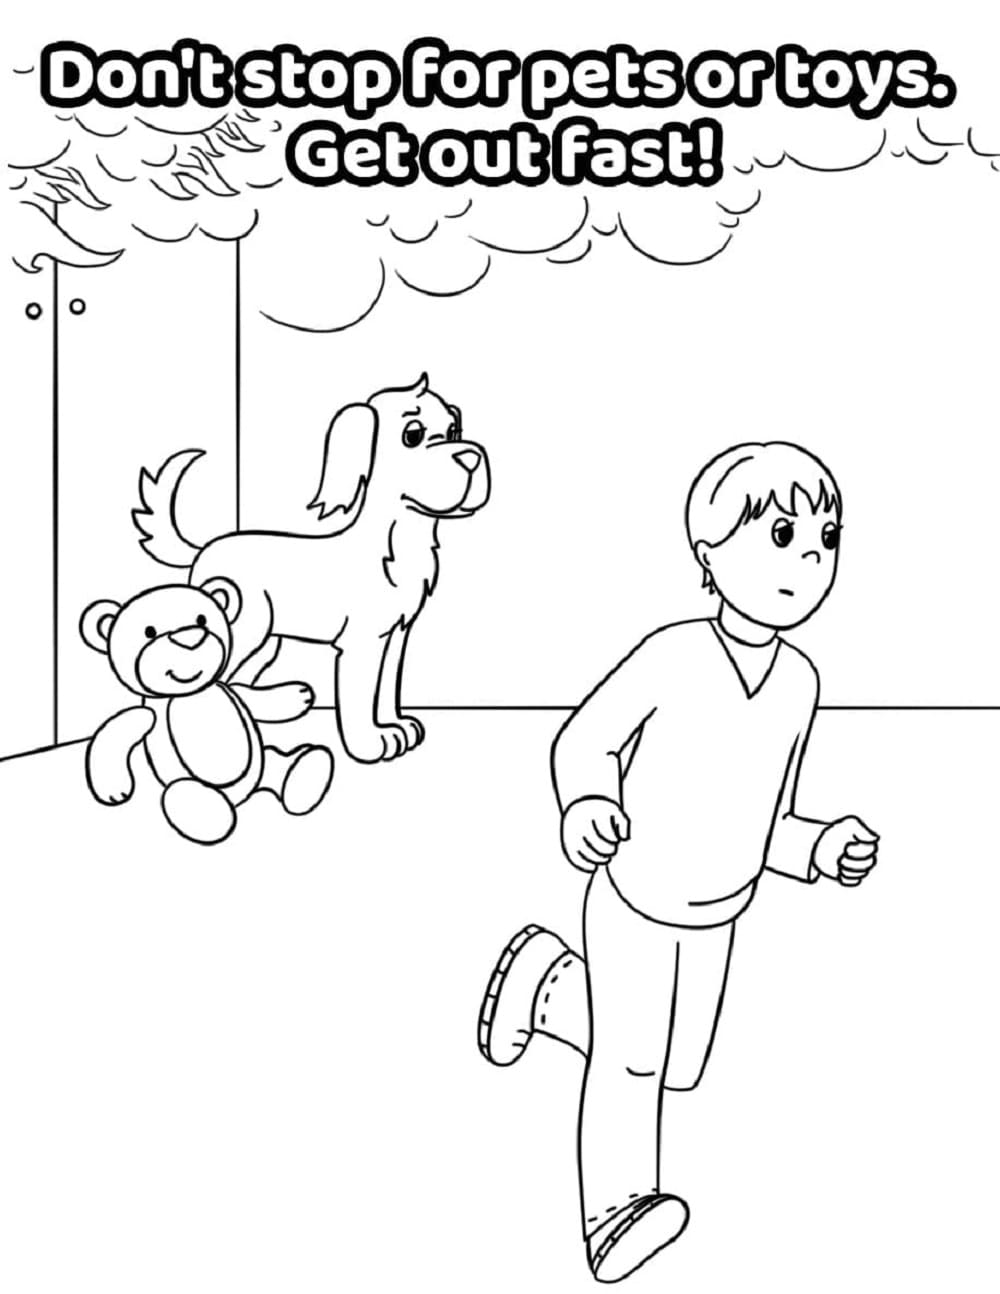 Printable Fire Safety Image Coloring Page